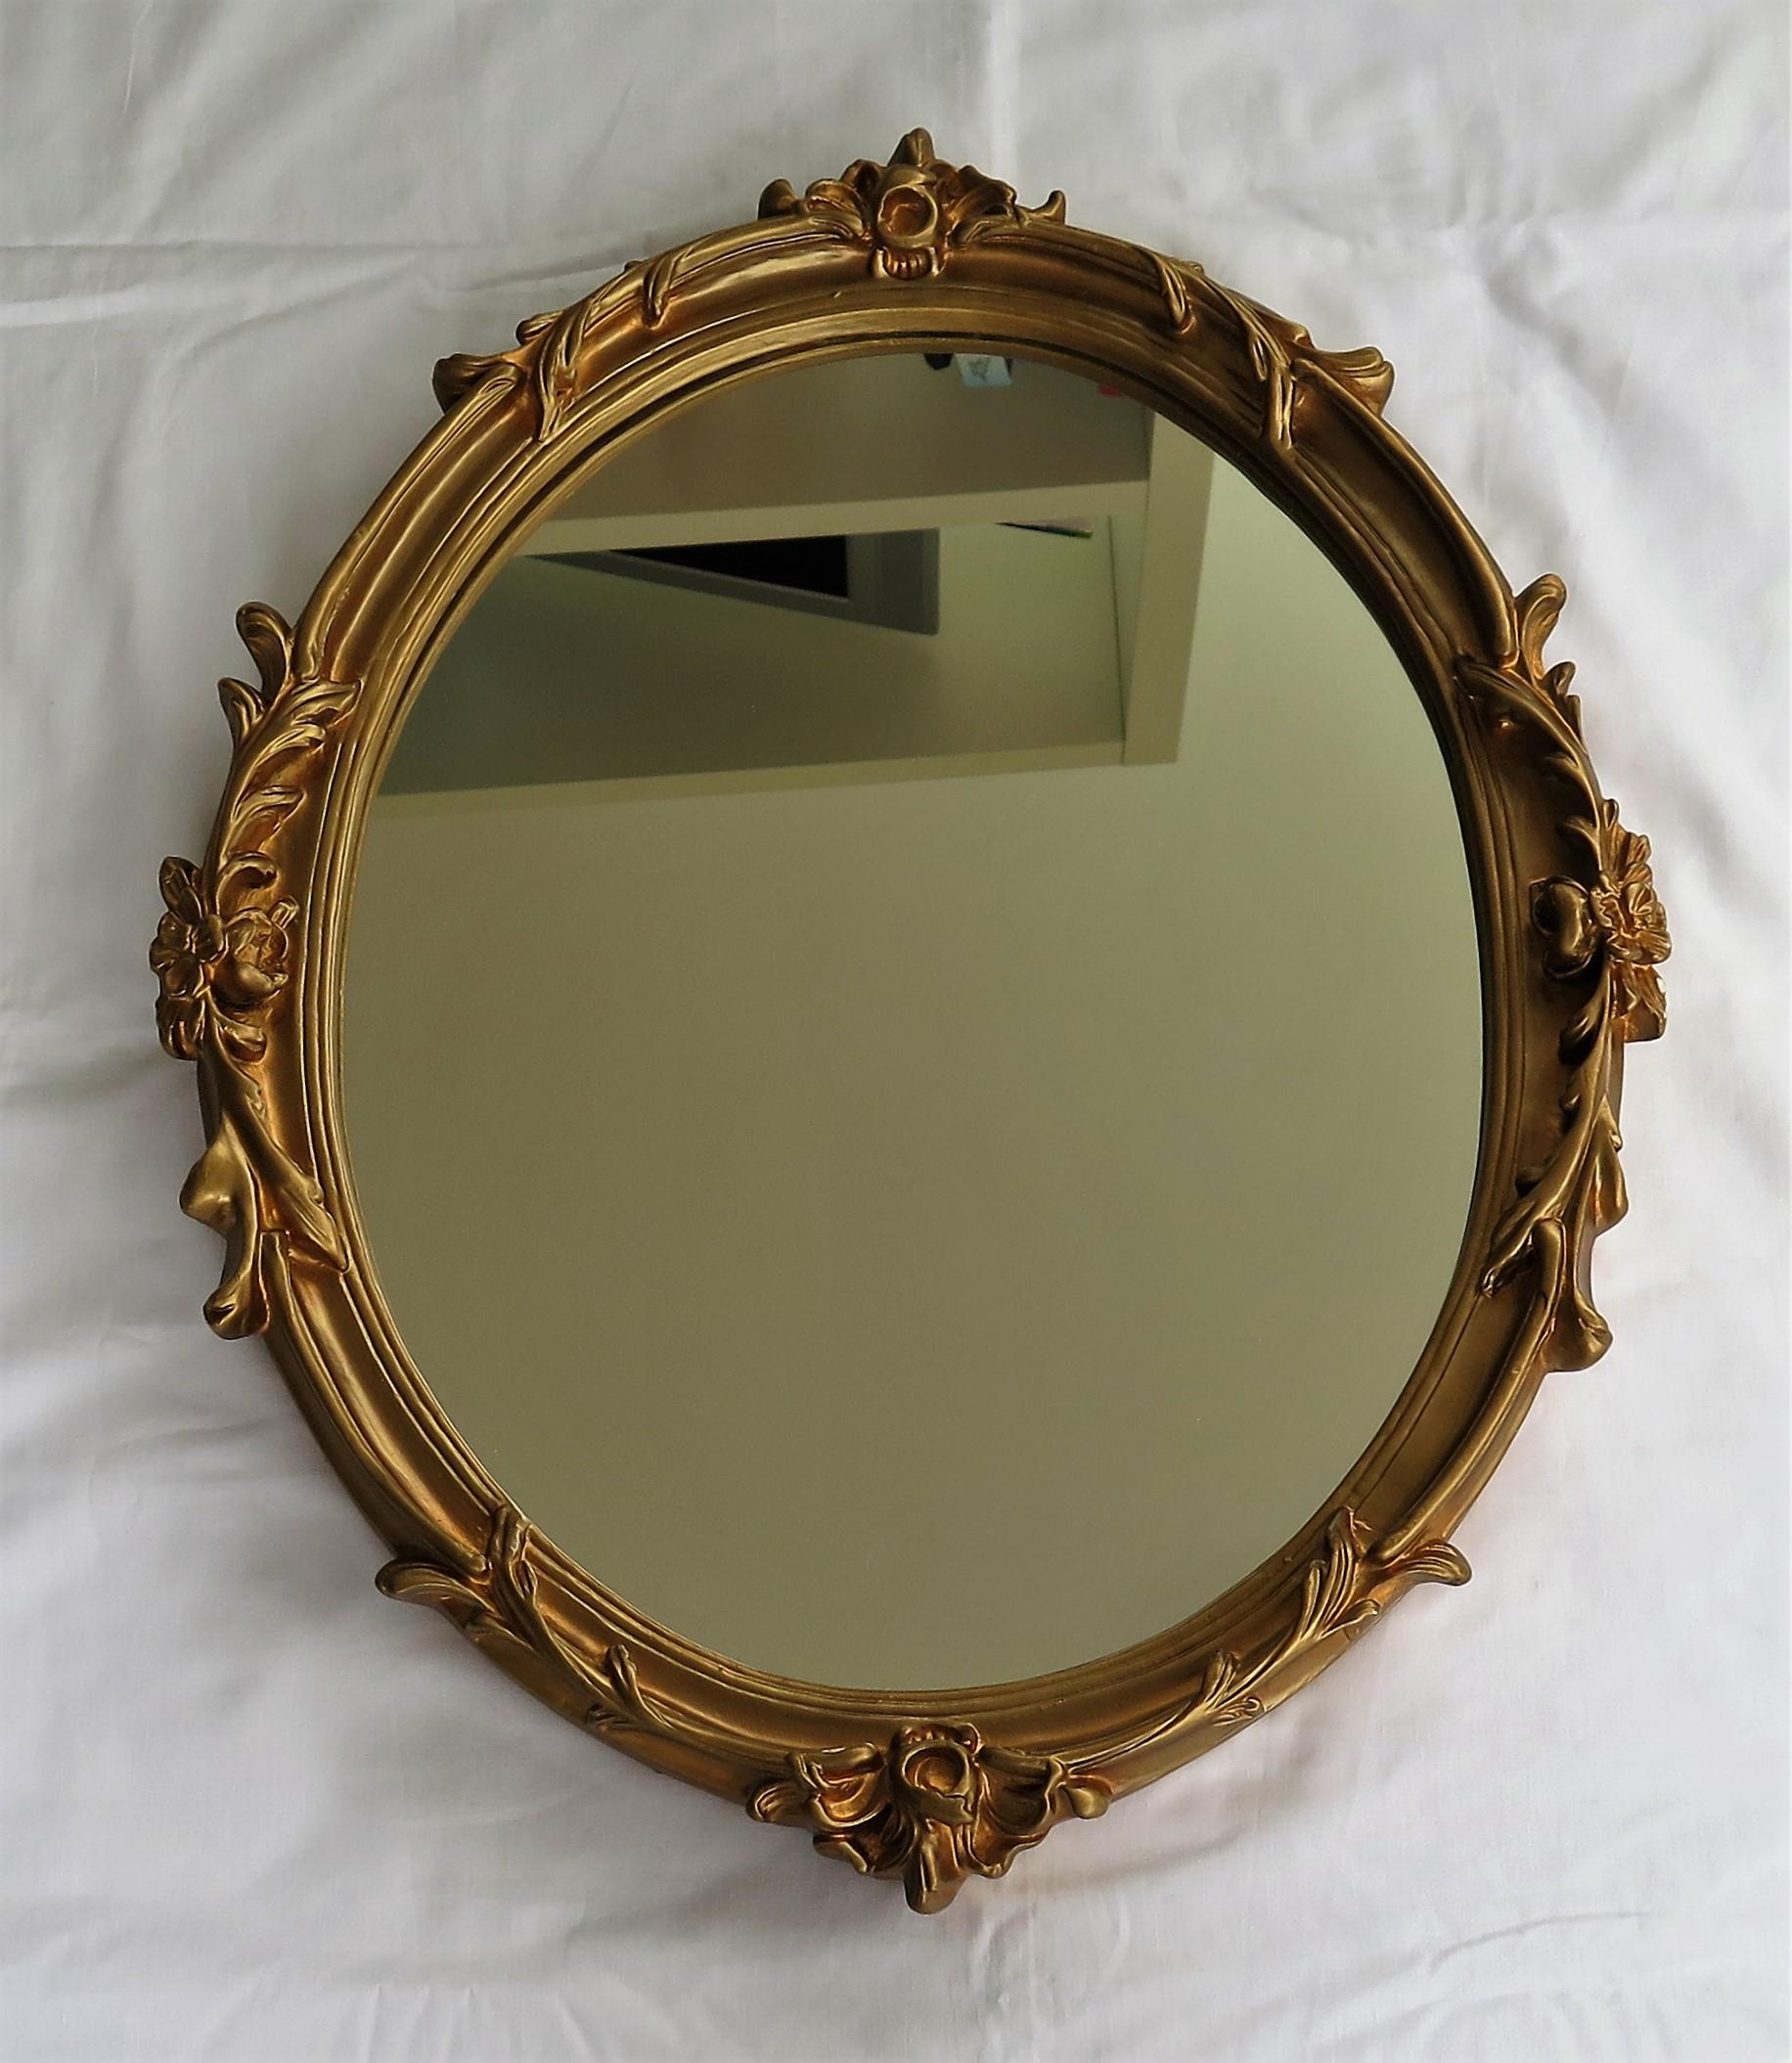 20th Century Oval Wall Mirror with Rococo Gold Finish Frame of Gesso on Wood, circa 1930